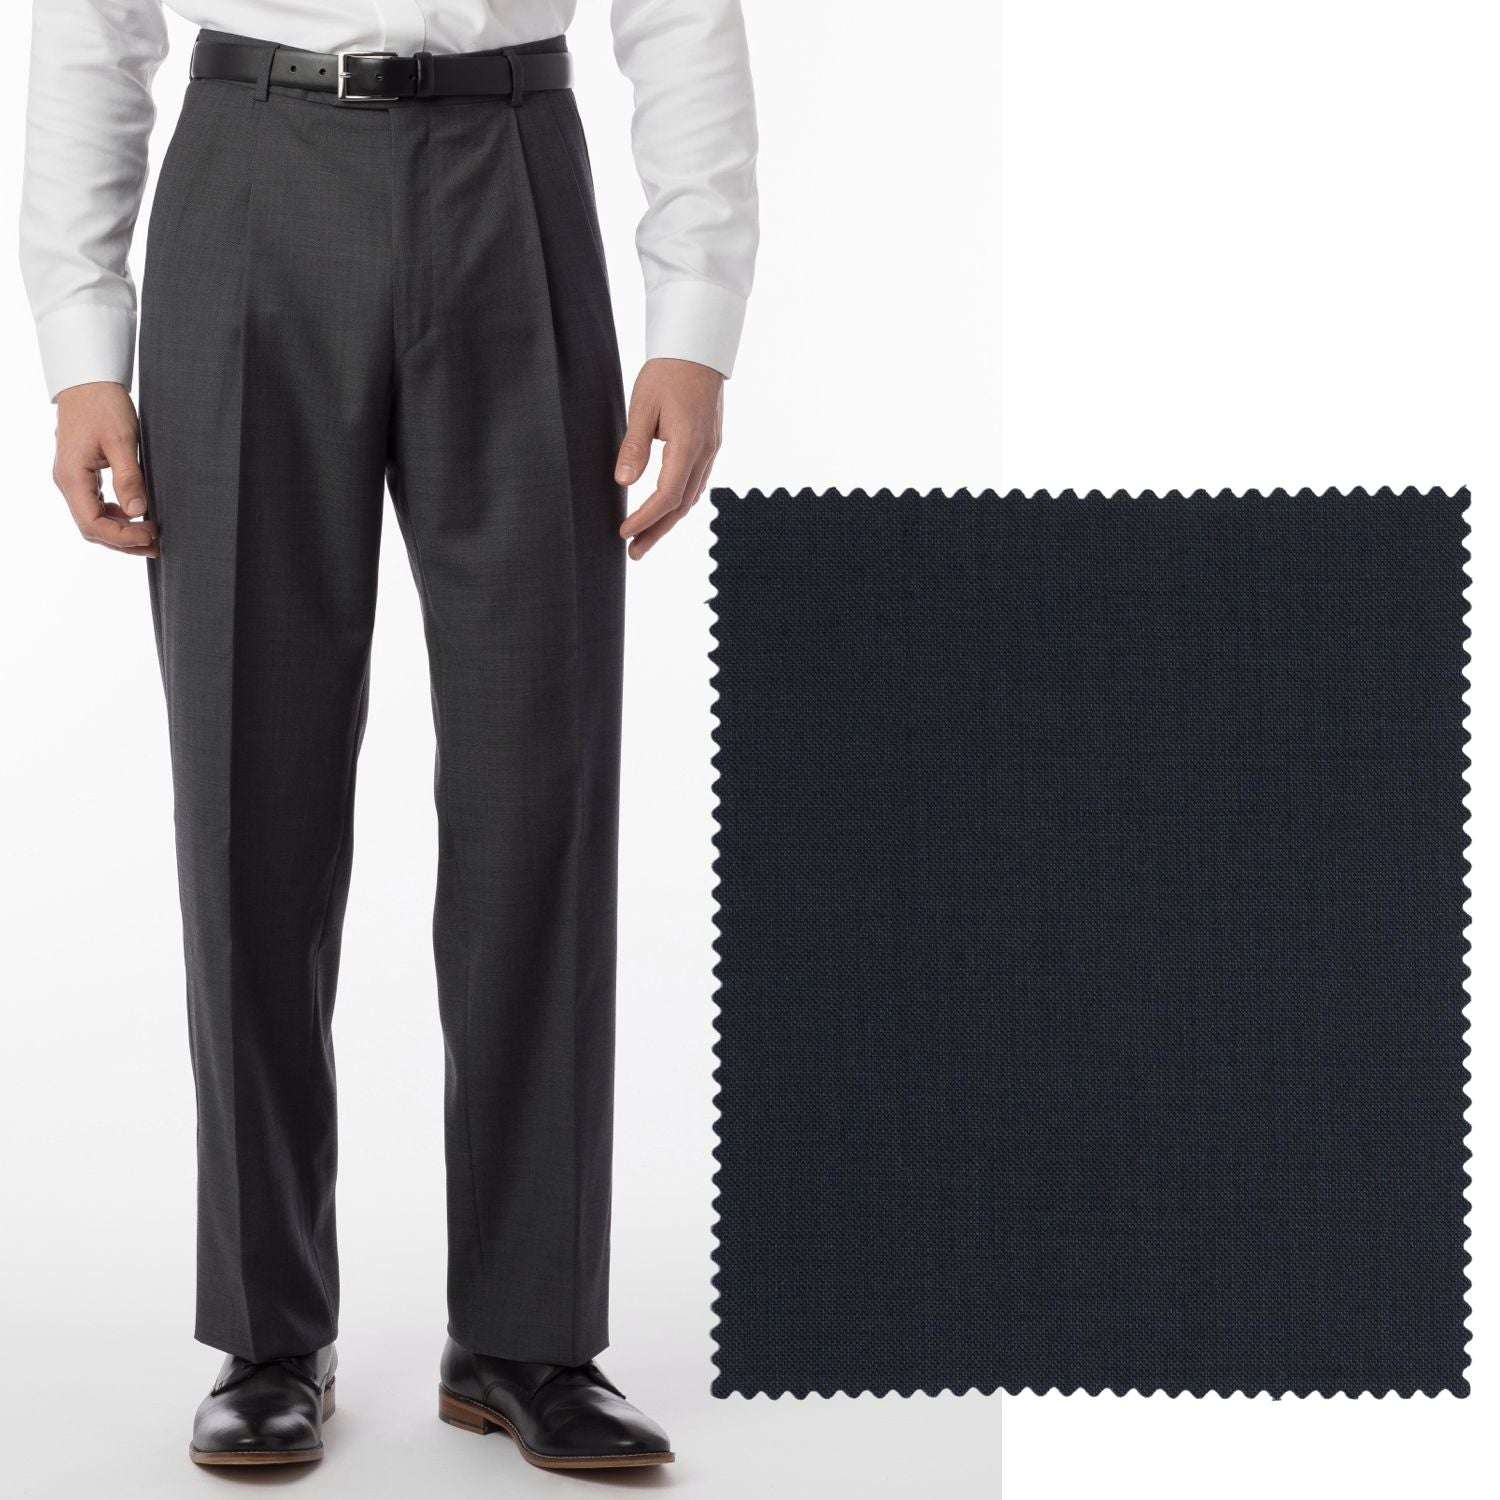 BIG FIT Sharkskin Super 120s Worsted Wool Comfort-EZE Trouser in Navy (Manchester Pleated Model) by Ballin